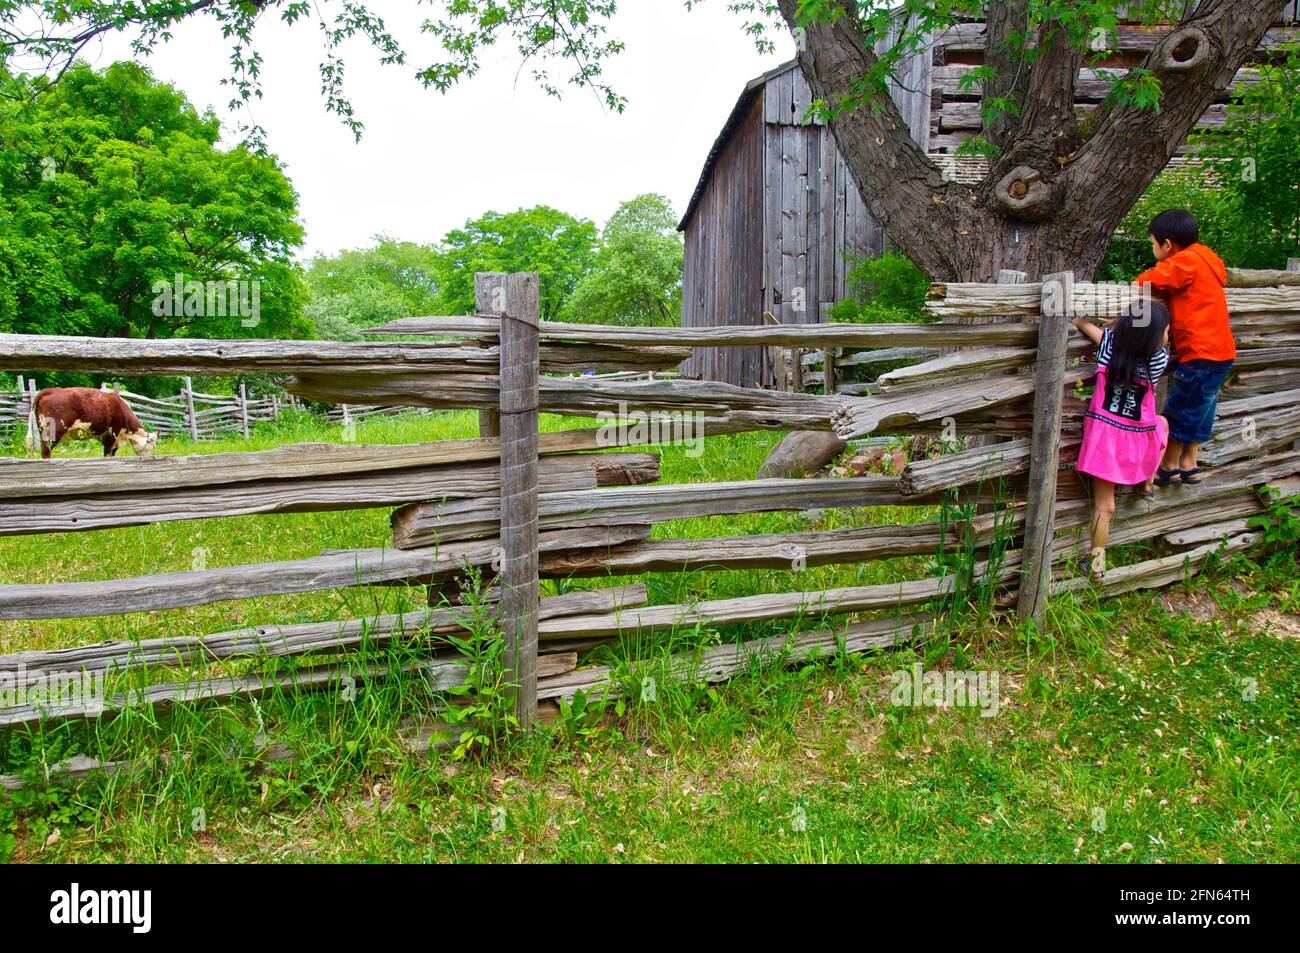 York, Ontario / Canada - May 27, 2012: Children climbed the wooden rail fence in an animal farm to have a view of the cow Stock Photo